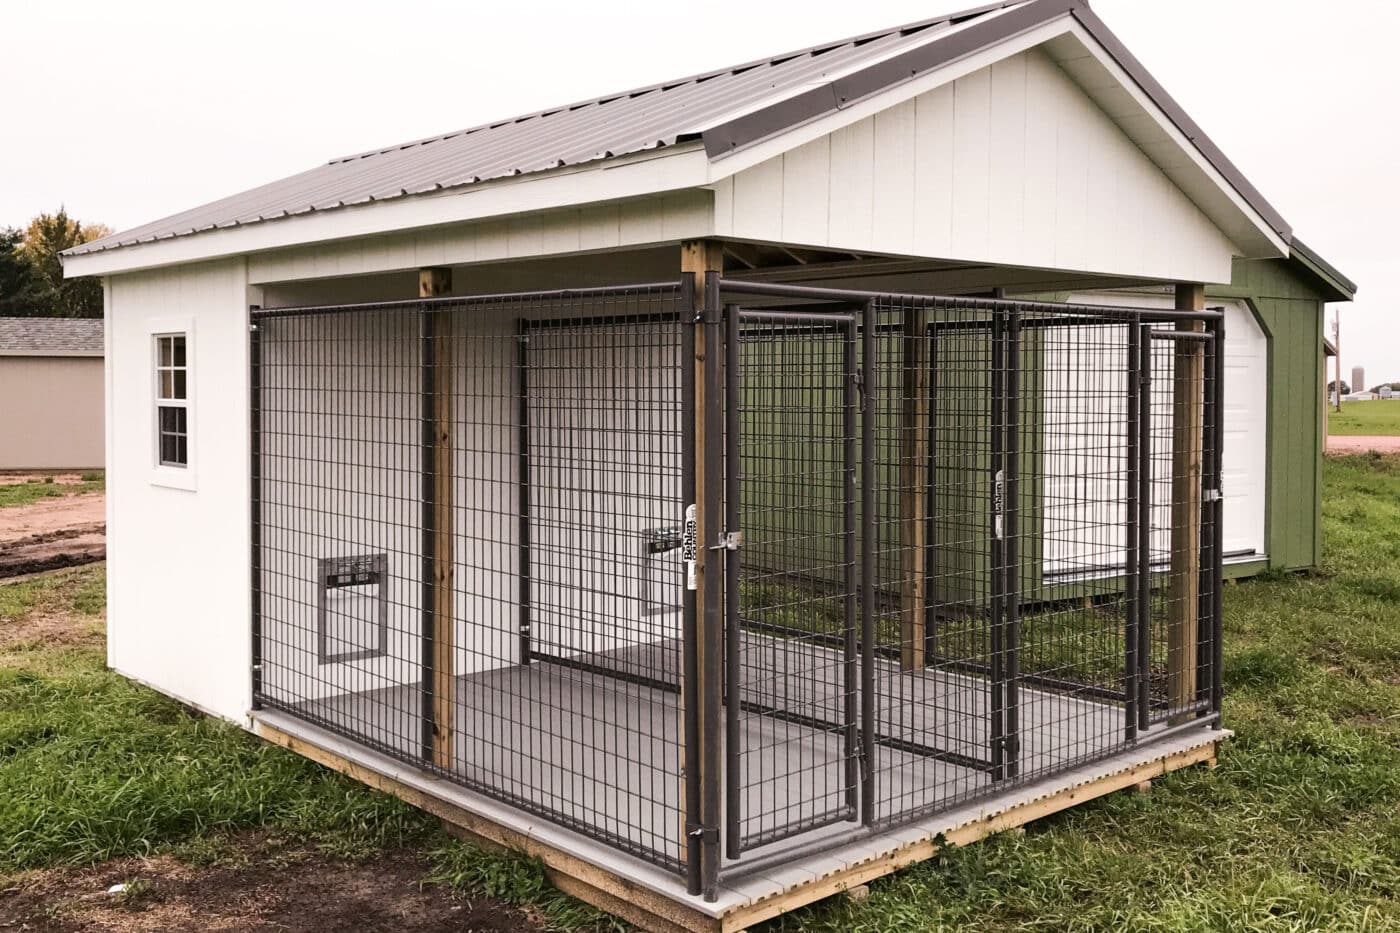 White Dog Kennel Shed with double run wooden dog kennels